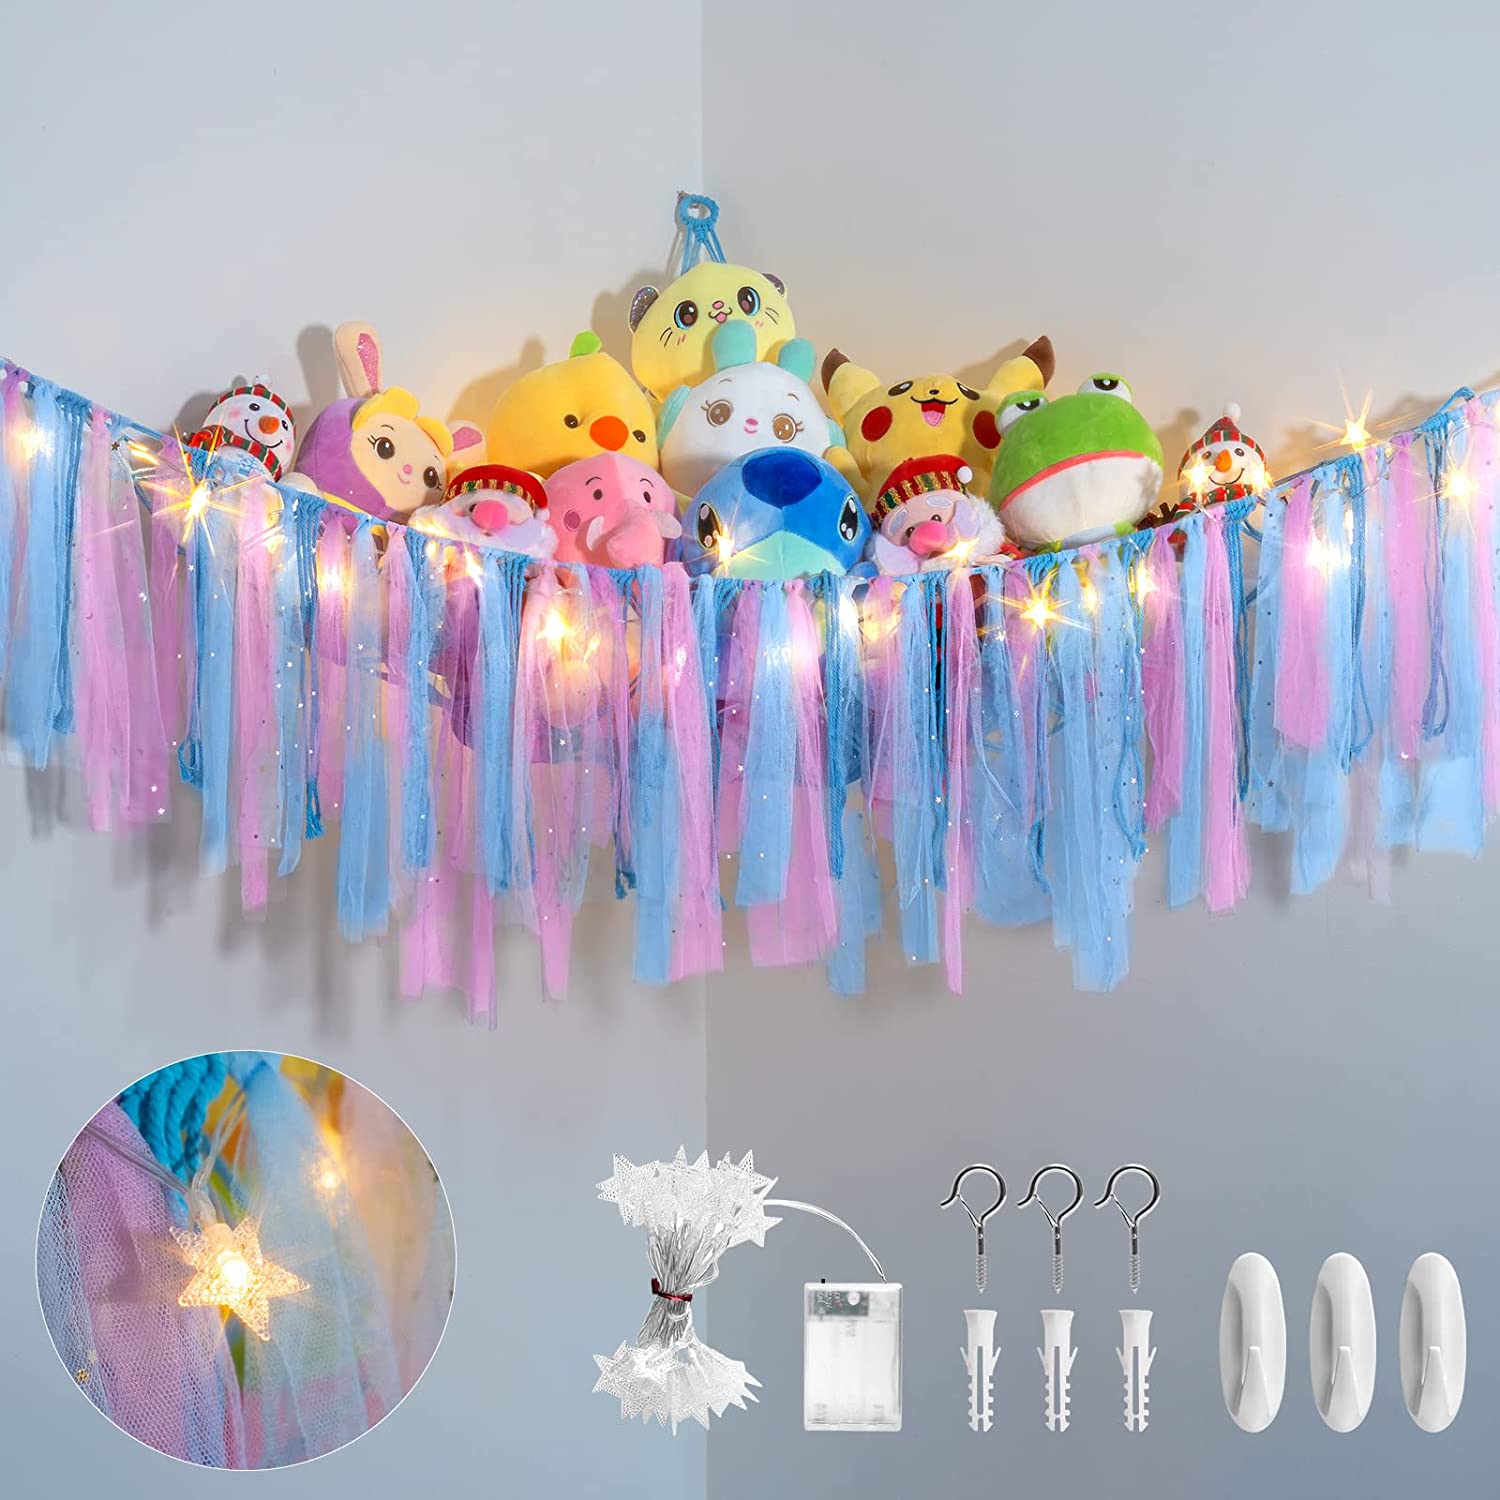 Snagshout  Stuffed Animal Net or Hammock with LED Light and